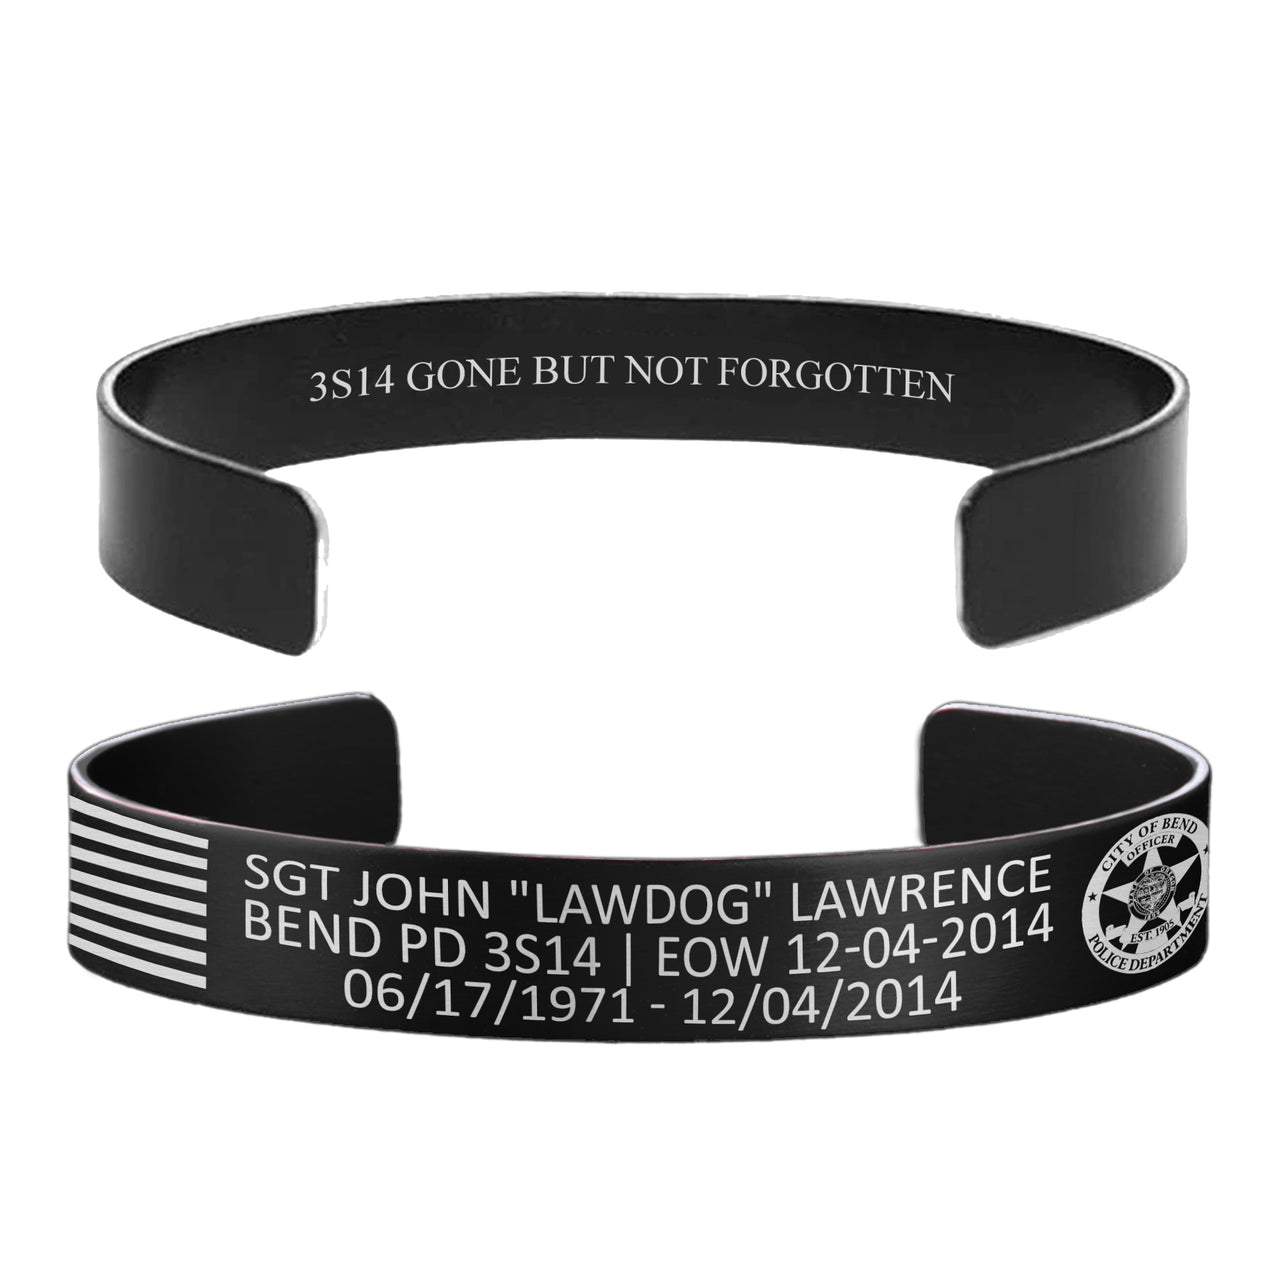 Sgt. John “Law Dog” Lawrence Memorial Band – Hosted by the Lawrence Family